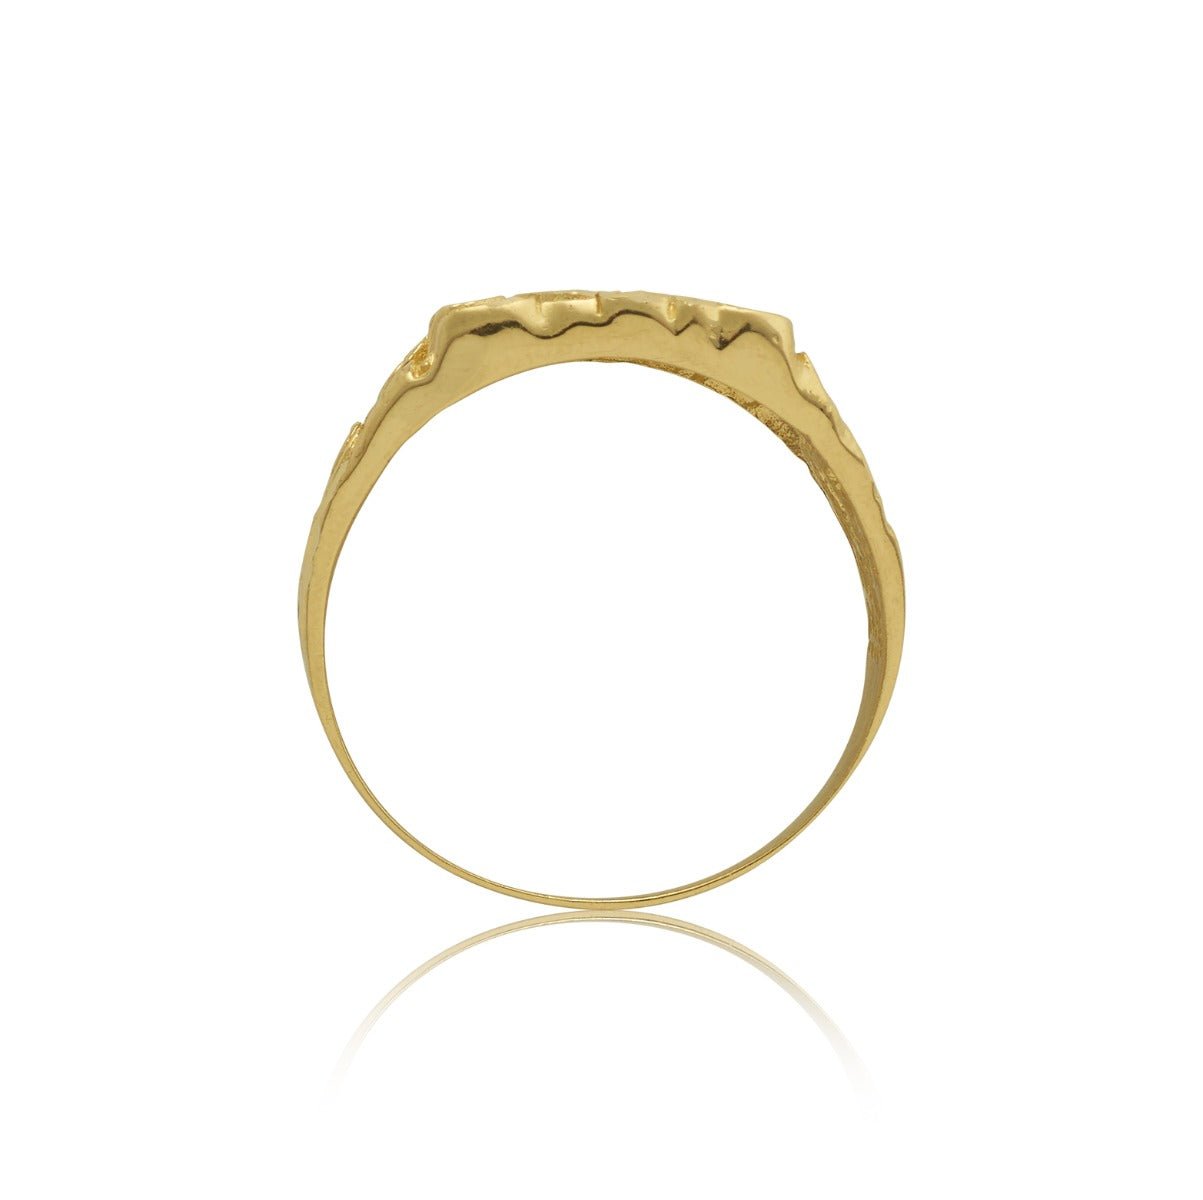 10K Yellow Gold Round Square Nugget Ring